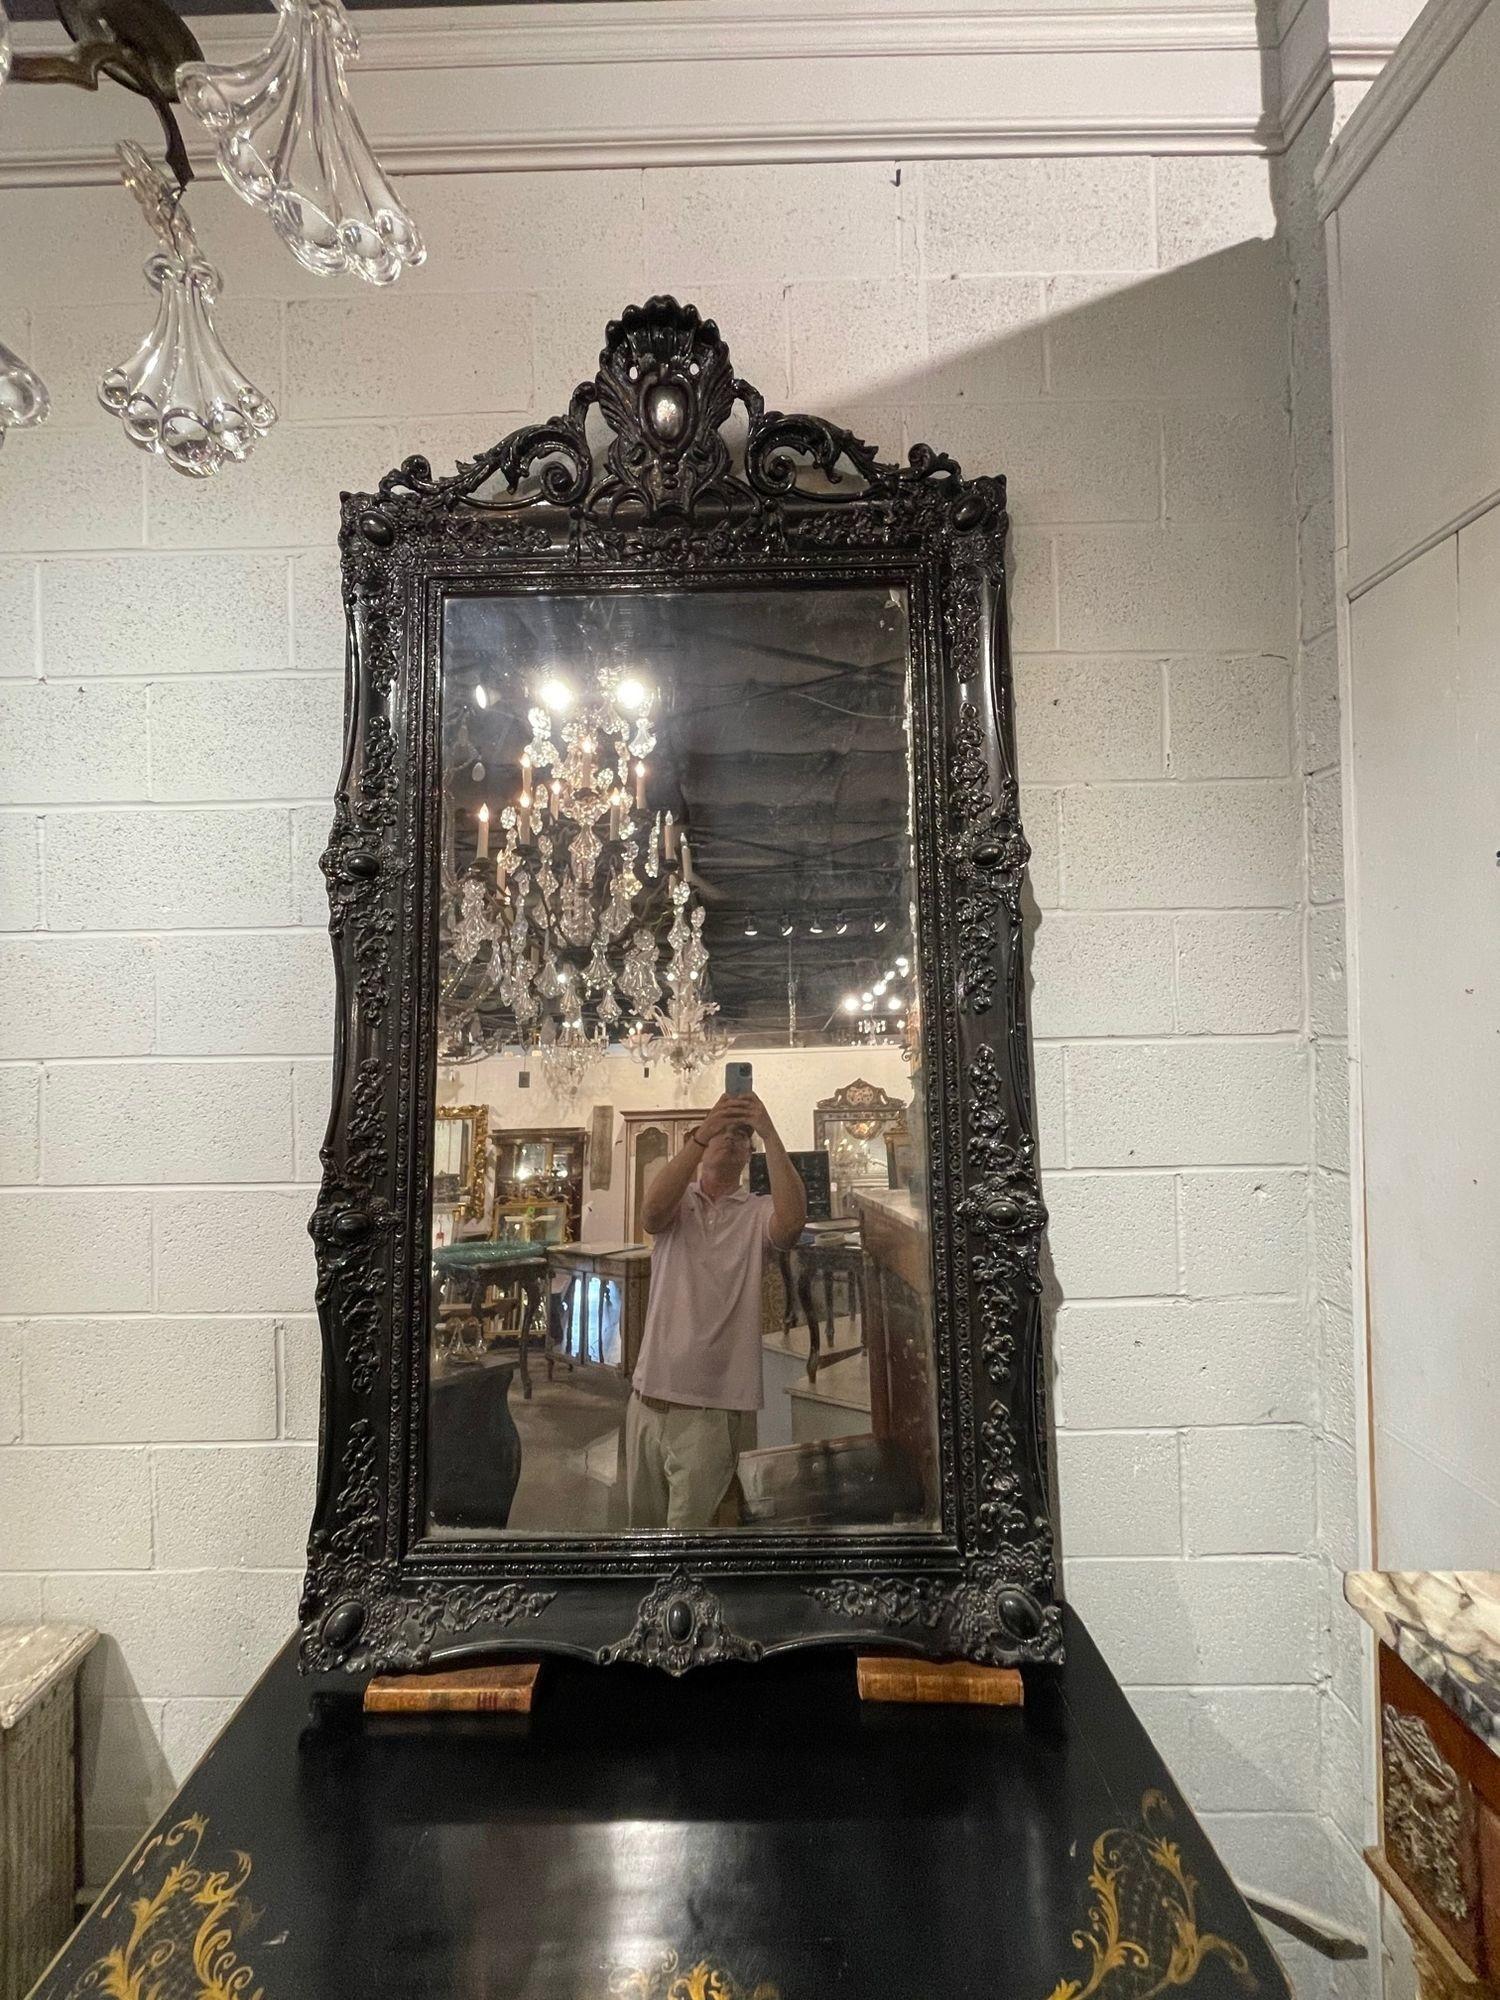 Very fine large scale 19th century French Louis XV style carved and black lacquered mirror. This piece has exceptional carvings including a crest at the top.